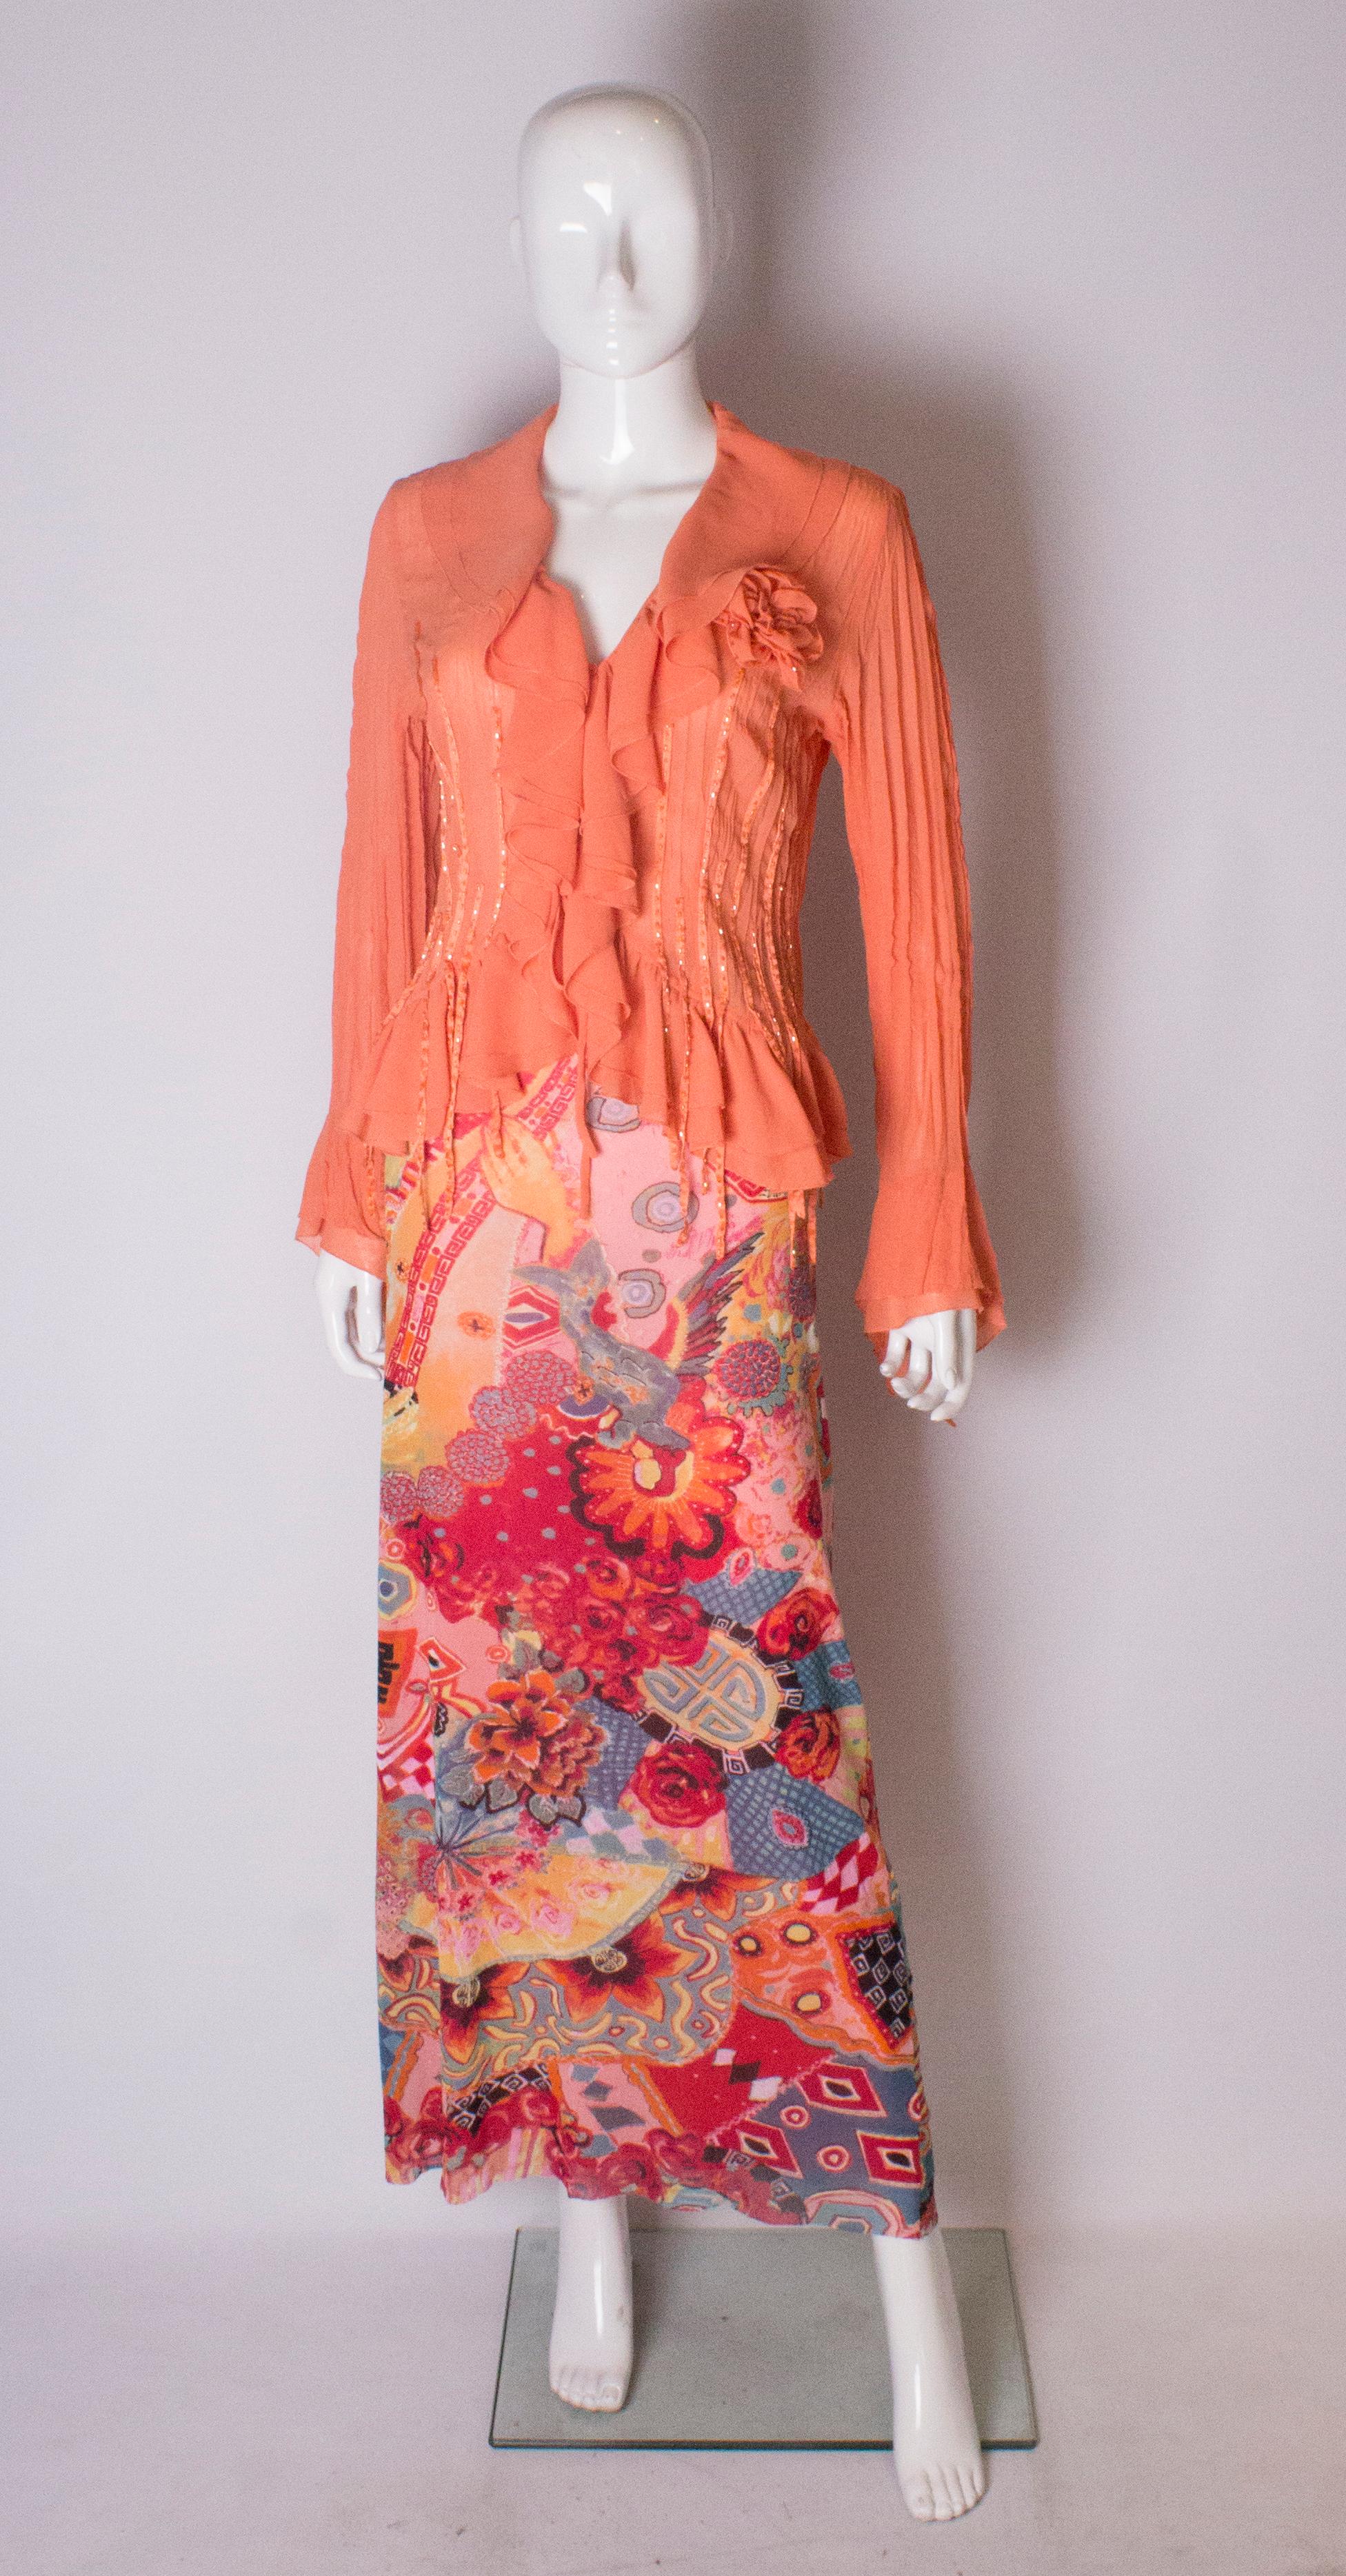 A stunning orange blouse by Claudia C. The blouse has a ruffle front with ribbon detail.